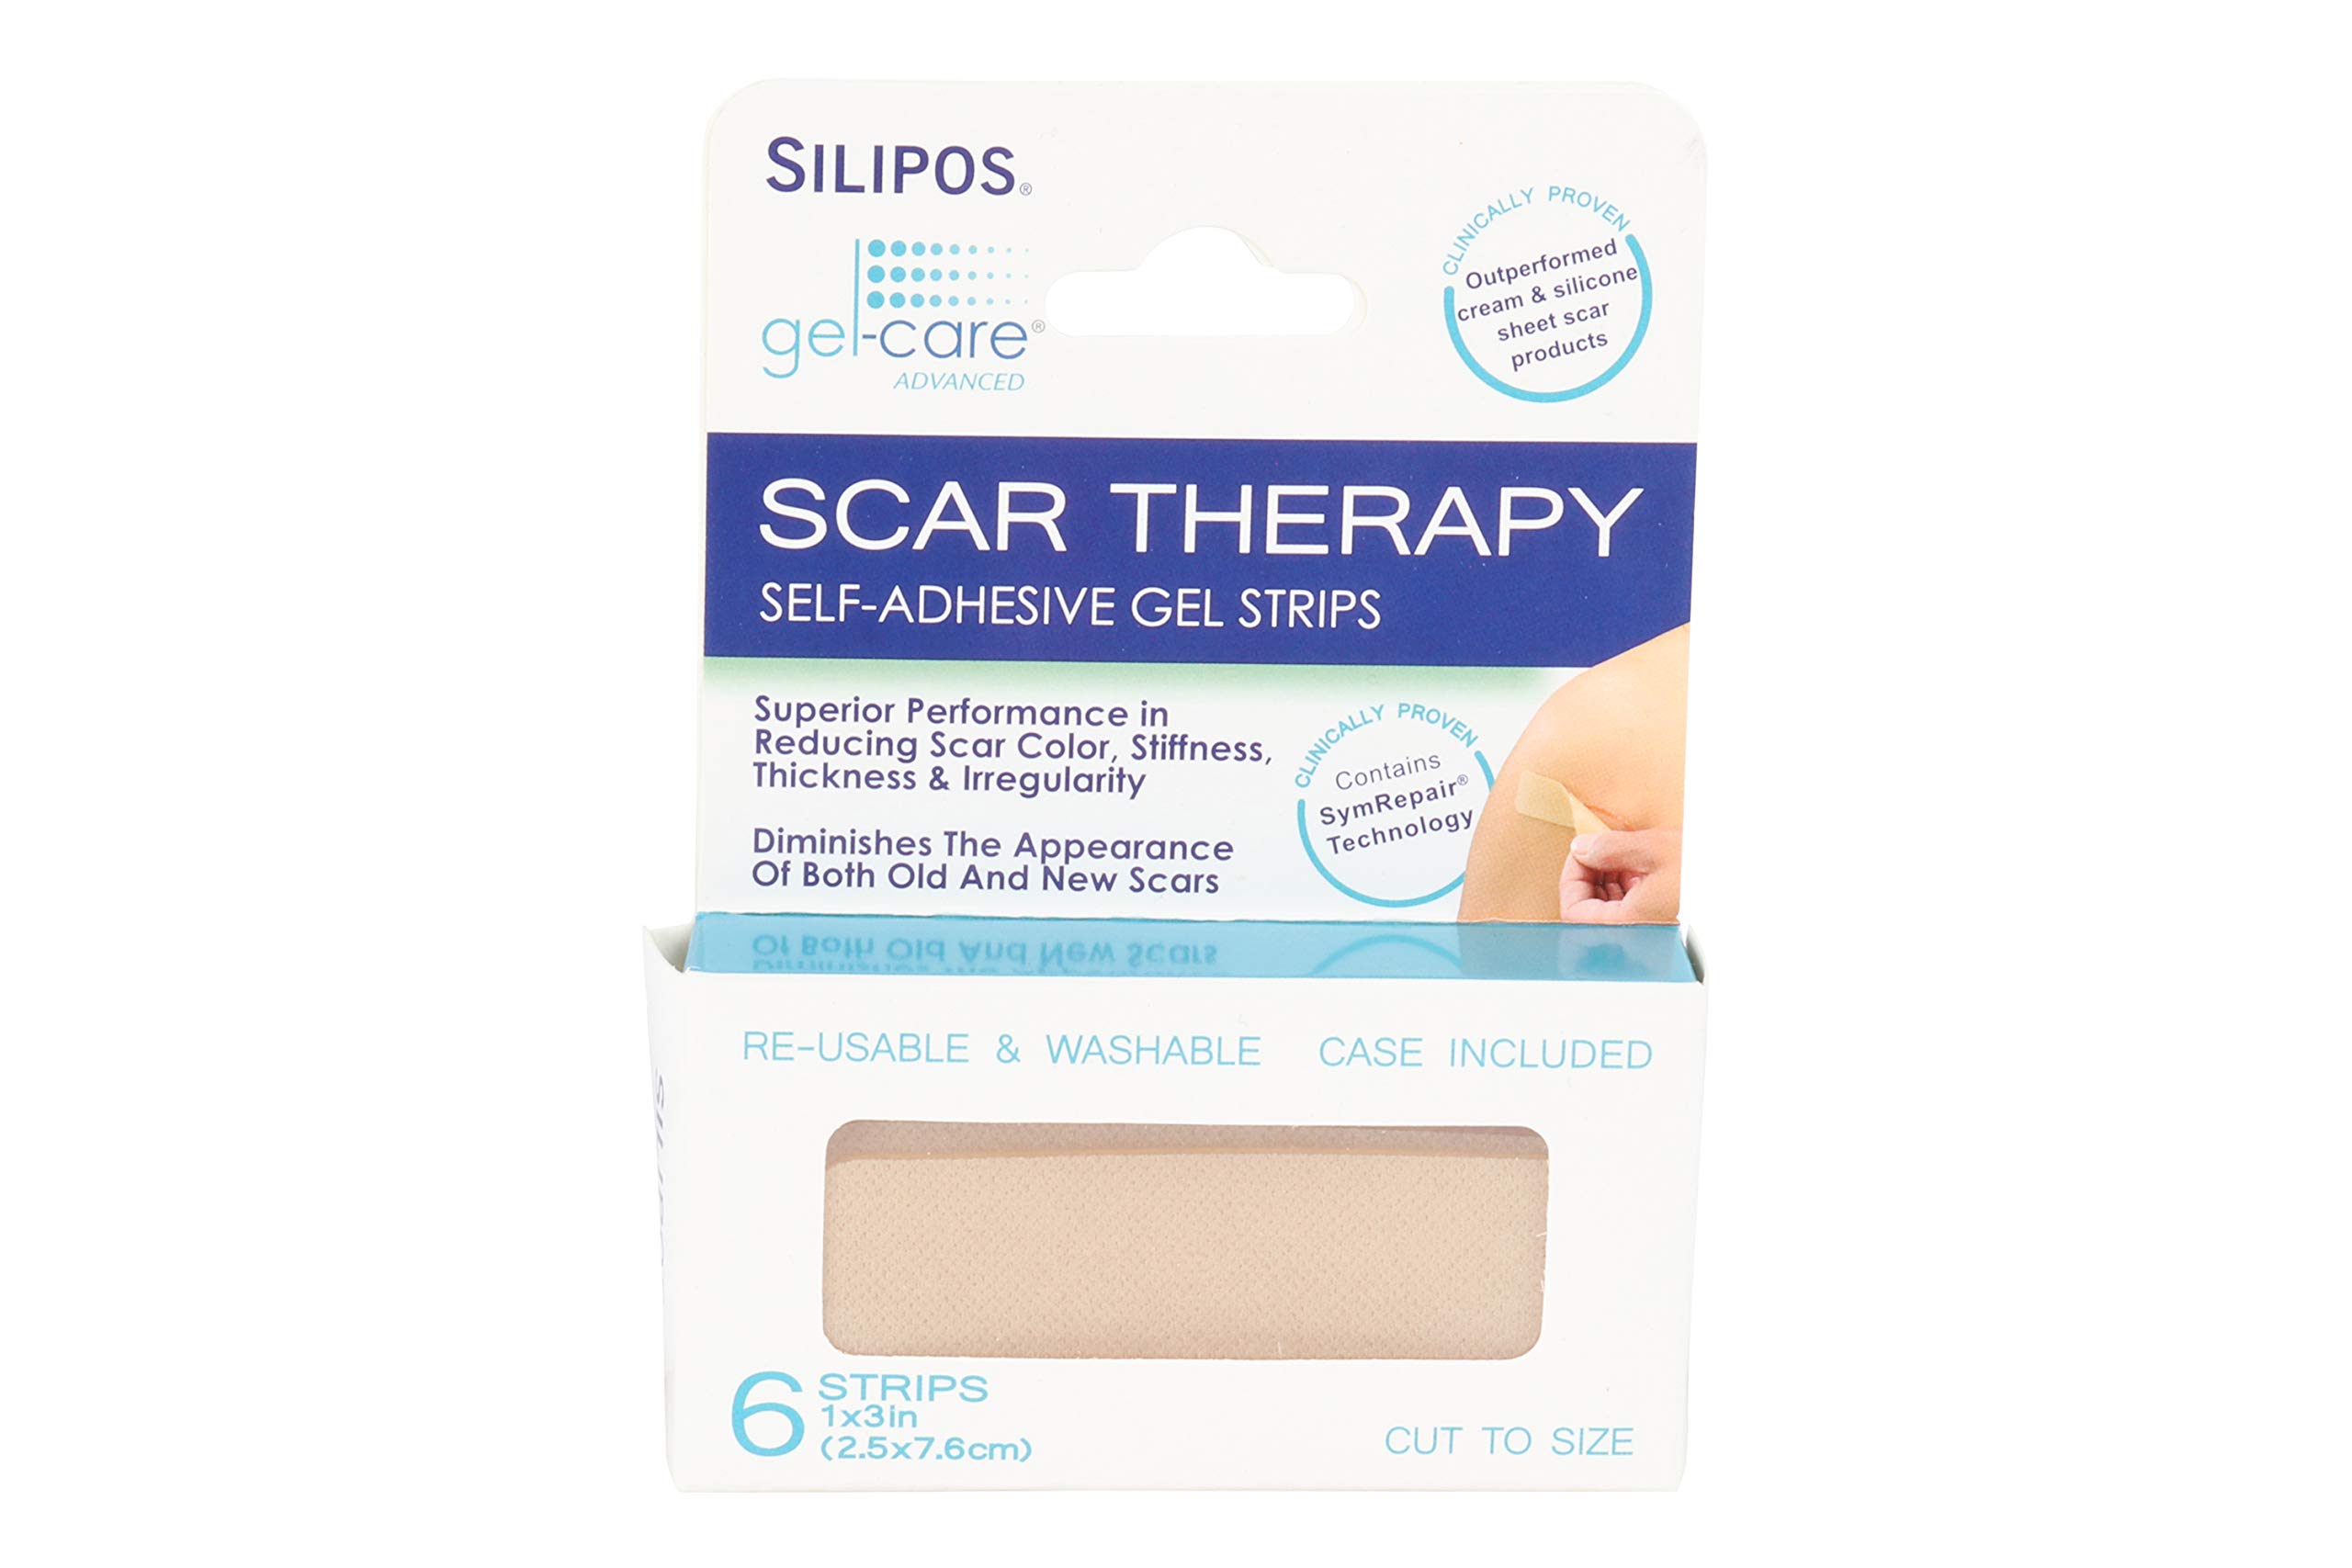 Silipos 92838 Gel-Care Advanced Scar Therapy Self-Adhesive Gel Strips  6-Pack 1x3 in. Washable